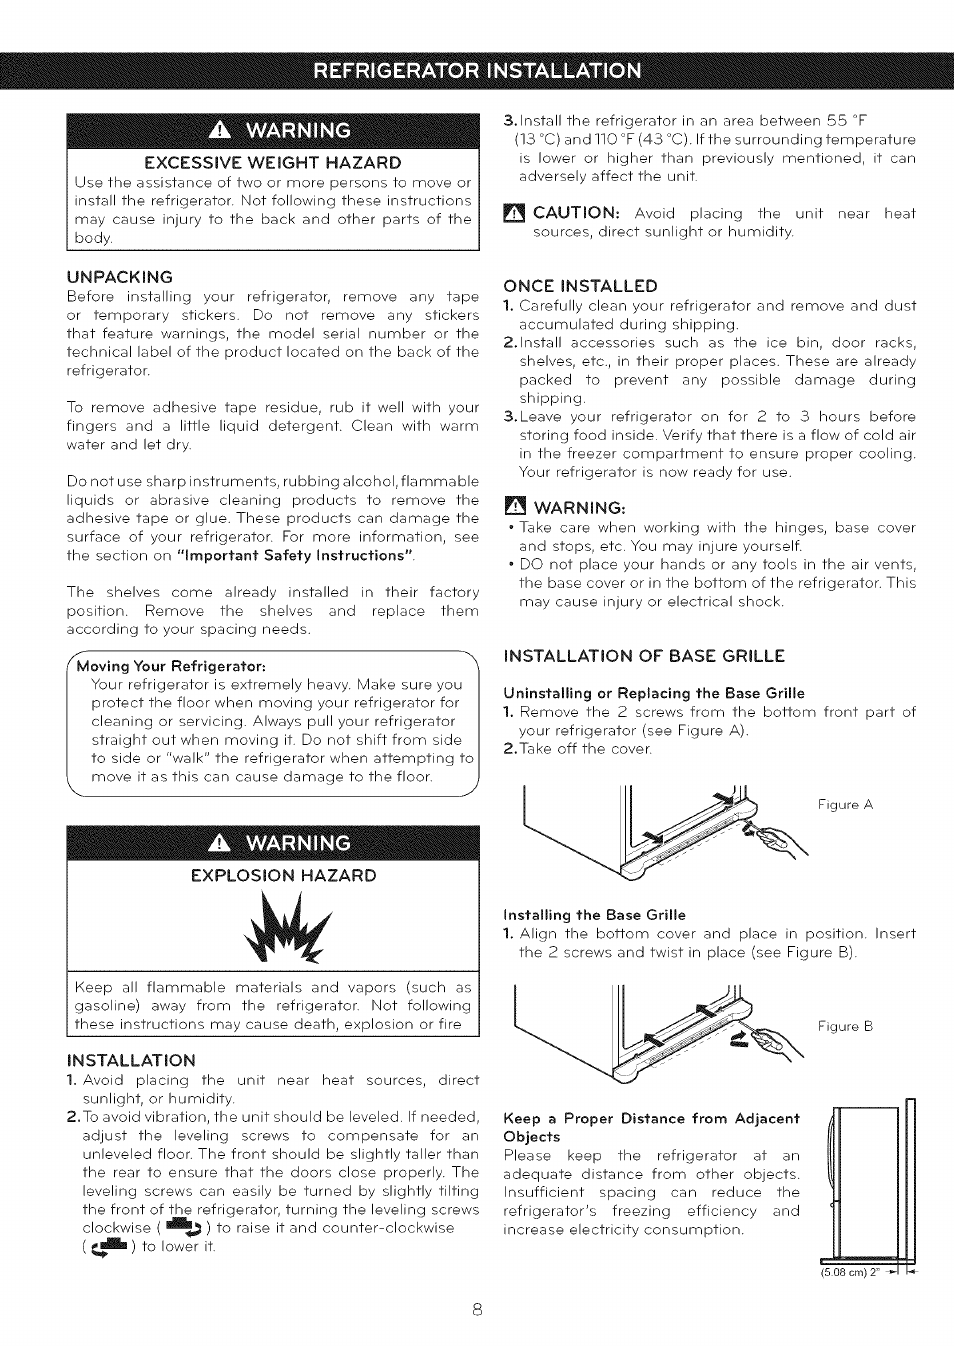 A warning, Excessive weight hazard, Unpacking | Moving your refrigerator, Explosion hazard, Installation, Once installed, 0 warning, Installation of base grille, Installing the base grille | LG LFC25765 User Manual | Page 9 / 31